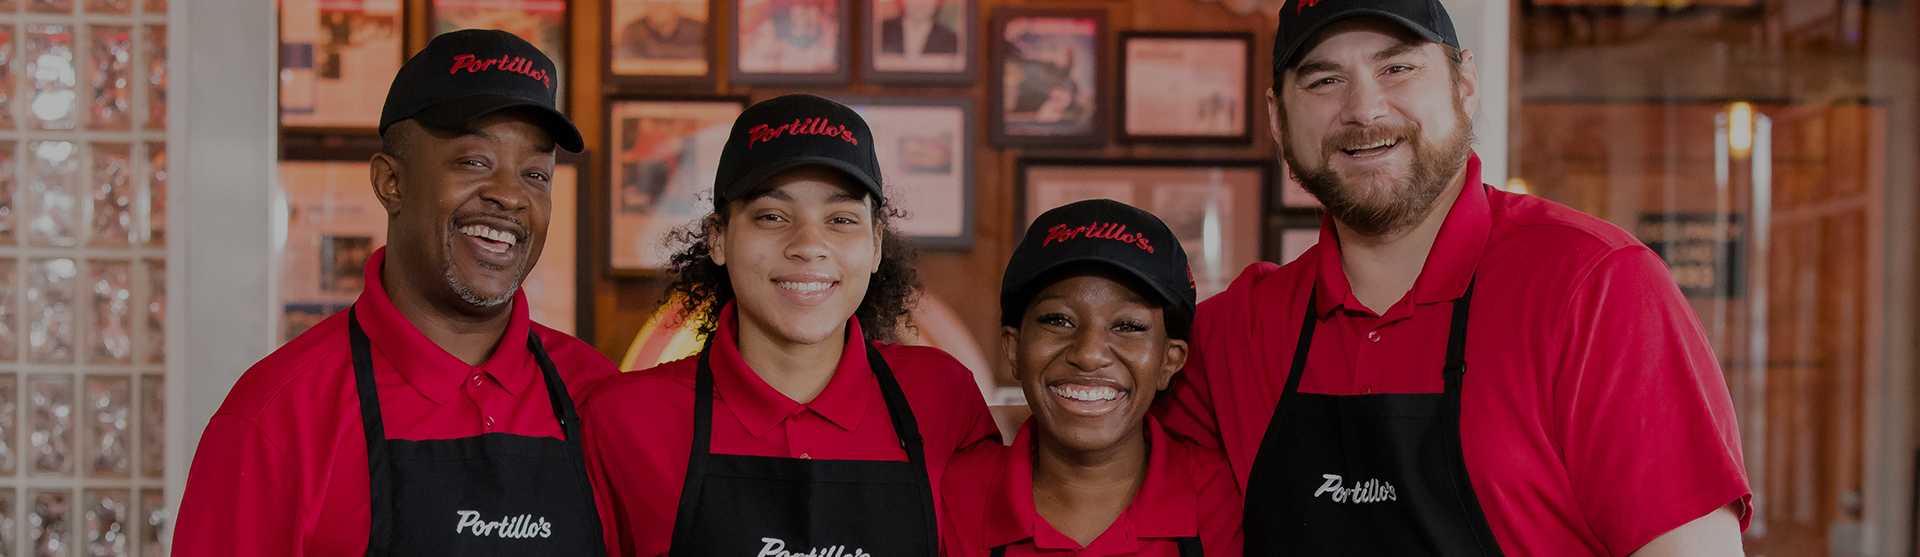 two smiling Portillo's employees